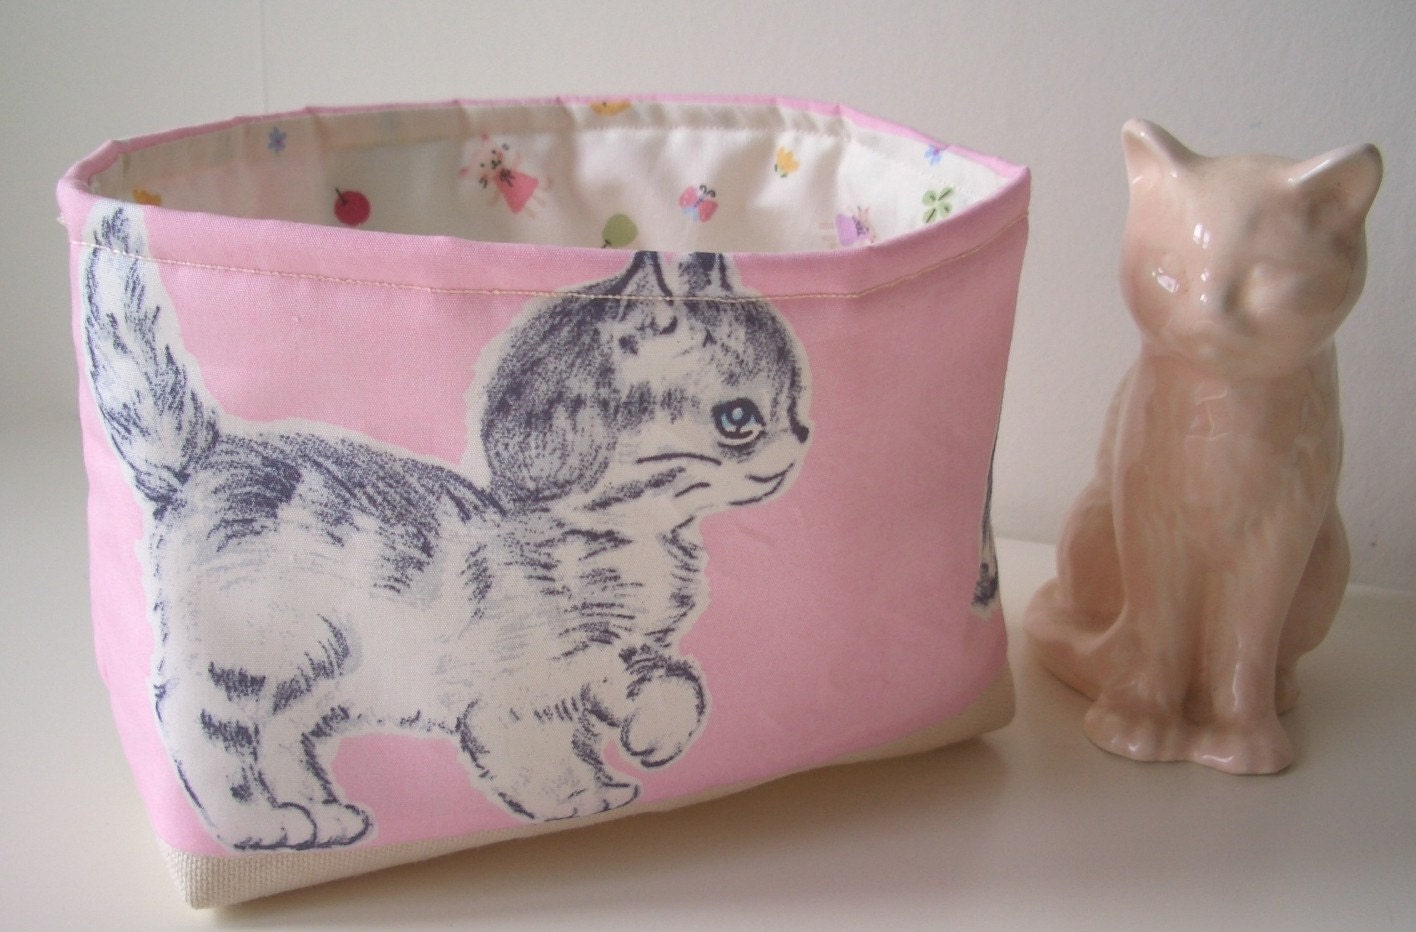 Fabric Tubby for Sharing, Snacking or Storage - Kittens